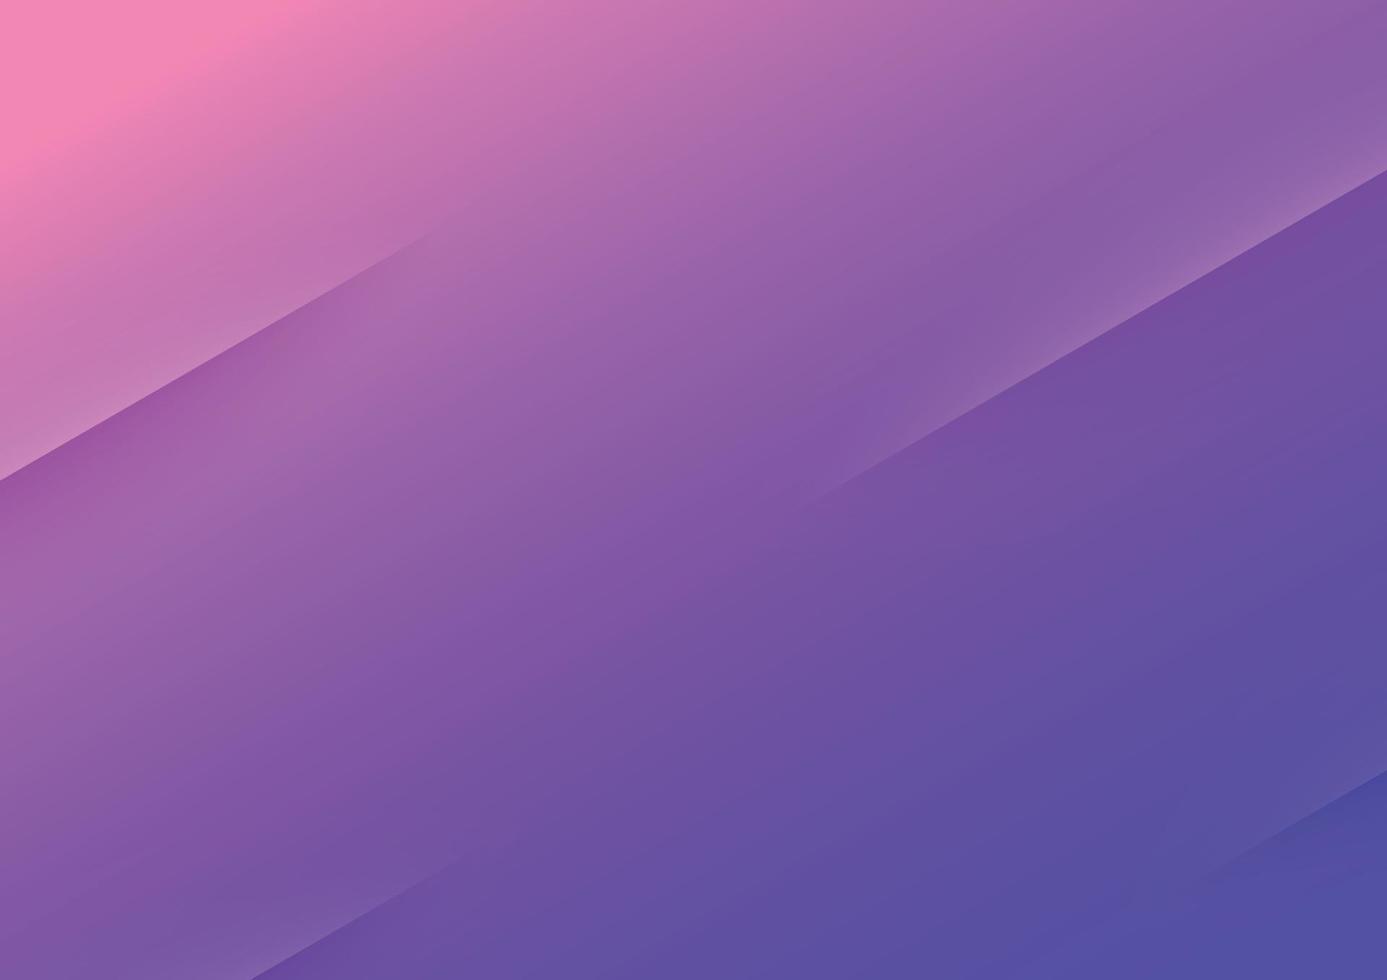 Gradient Shadow Lines Abstract Purple Background vector